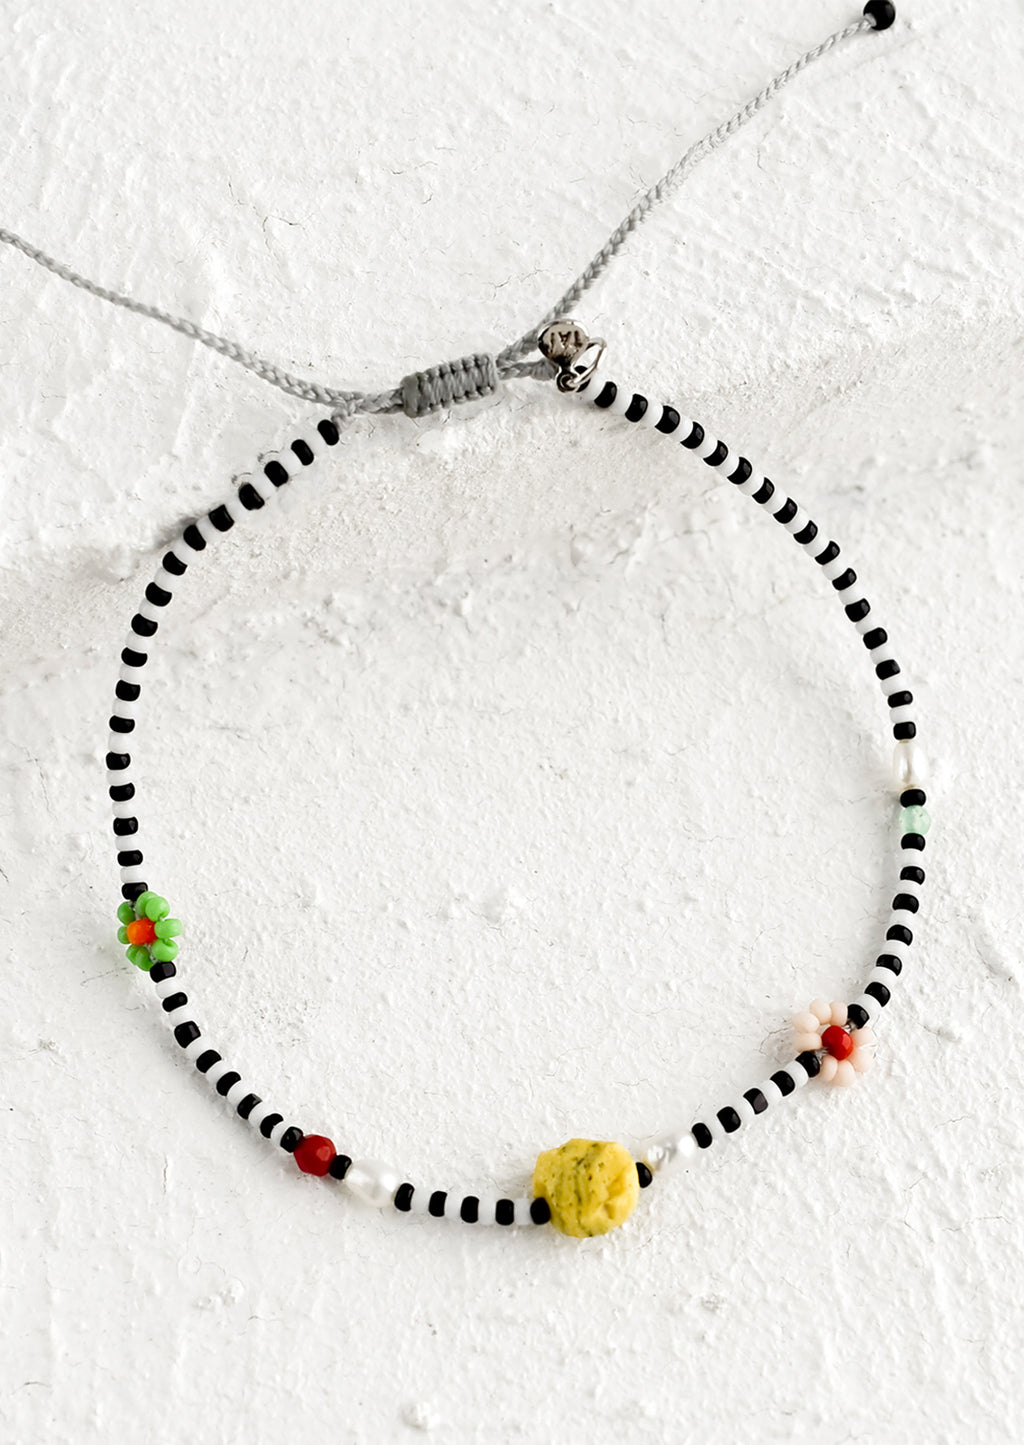 Black & White / Yellow Coral: A black and white seed bead bracelet with mixed flower and gemstone beads.